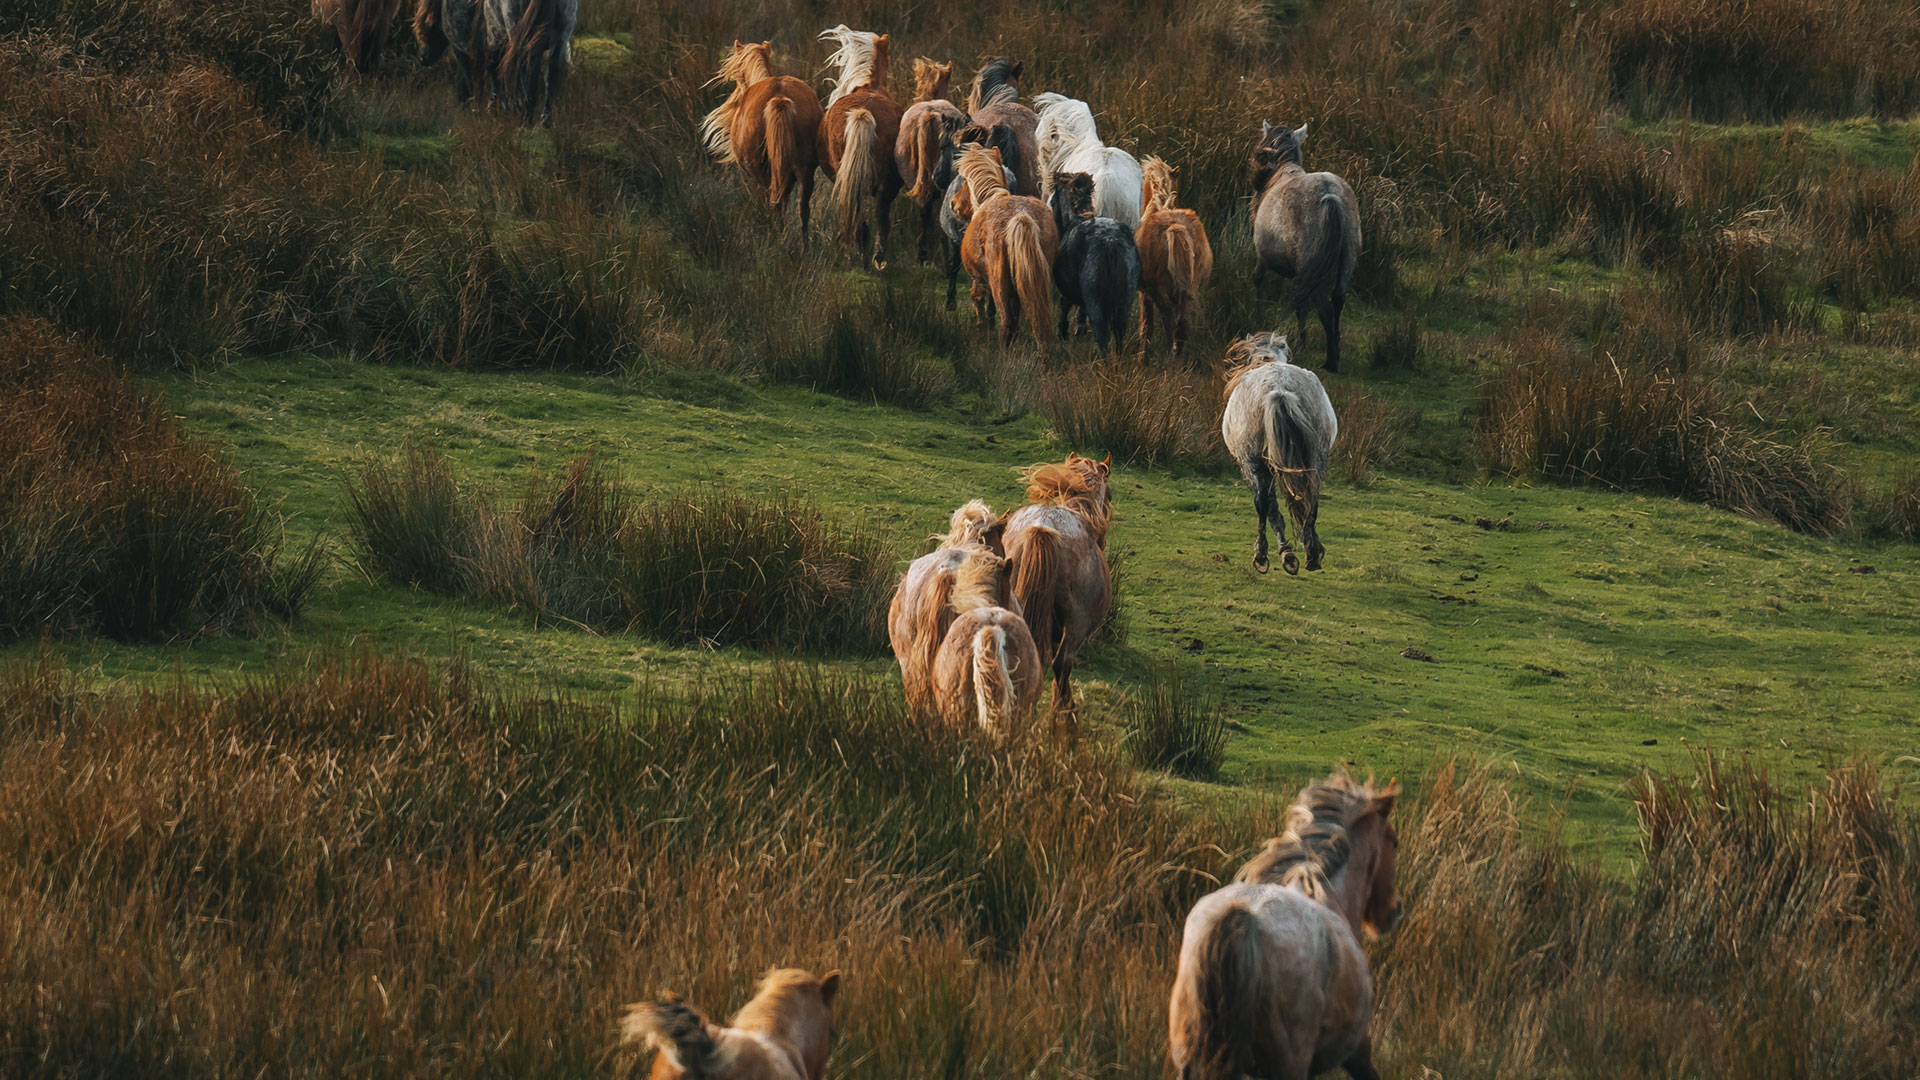 Carneddau Mountain Ponies being herded down from the mountain for their annual vet check and inspection